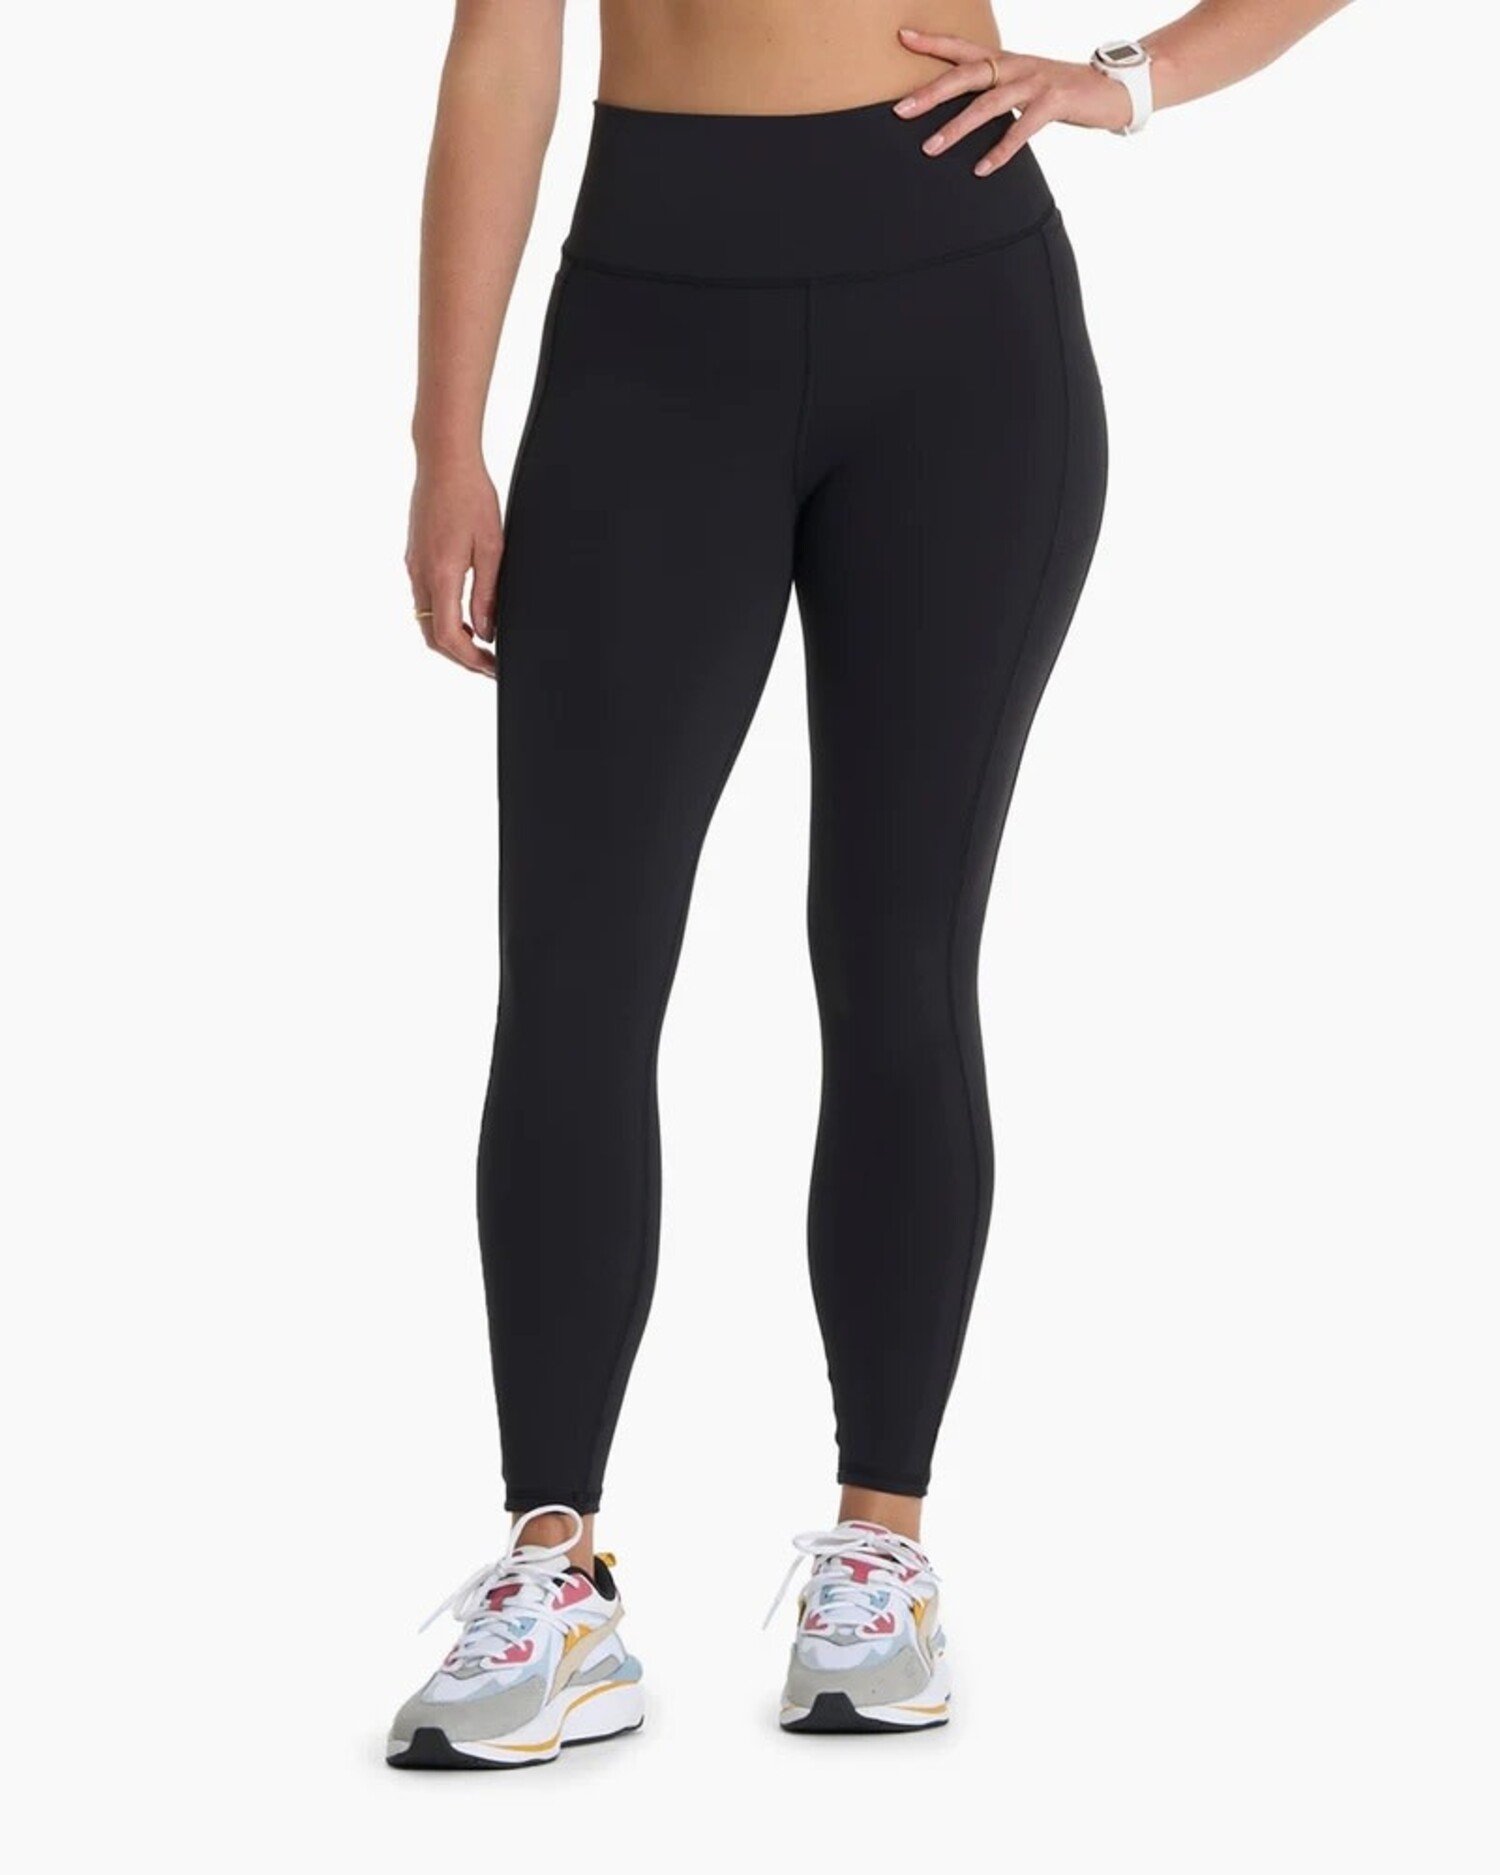 Buy MANIFIQUE Women's Studio Activewear Workout Athletic Seamless Legging  Bottom at Amazon.in